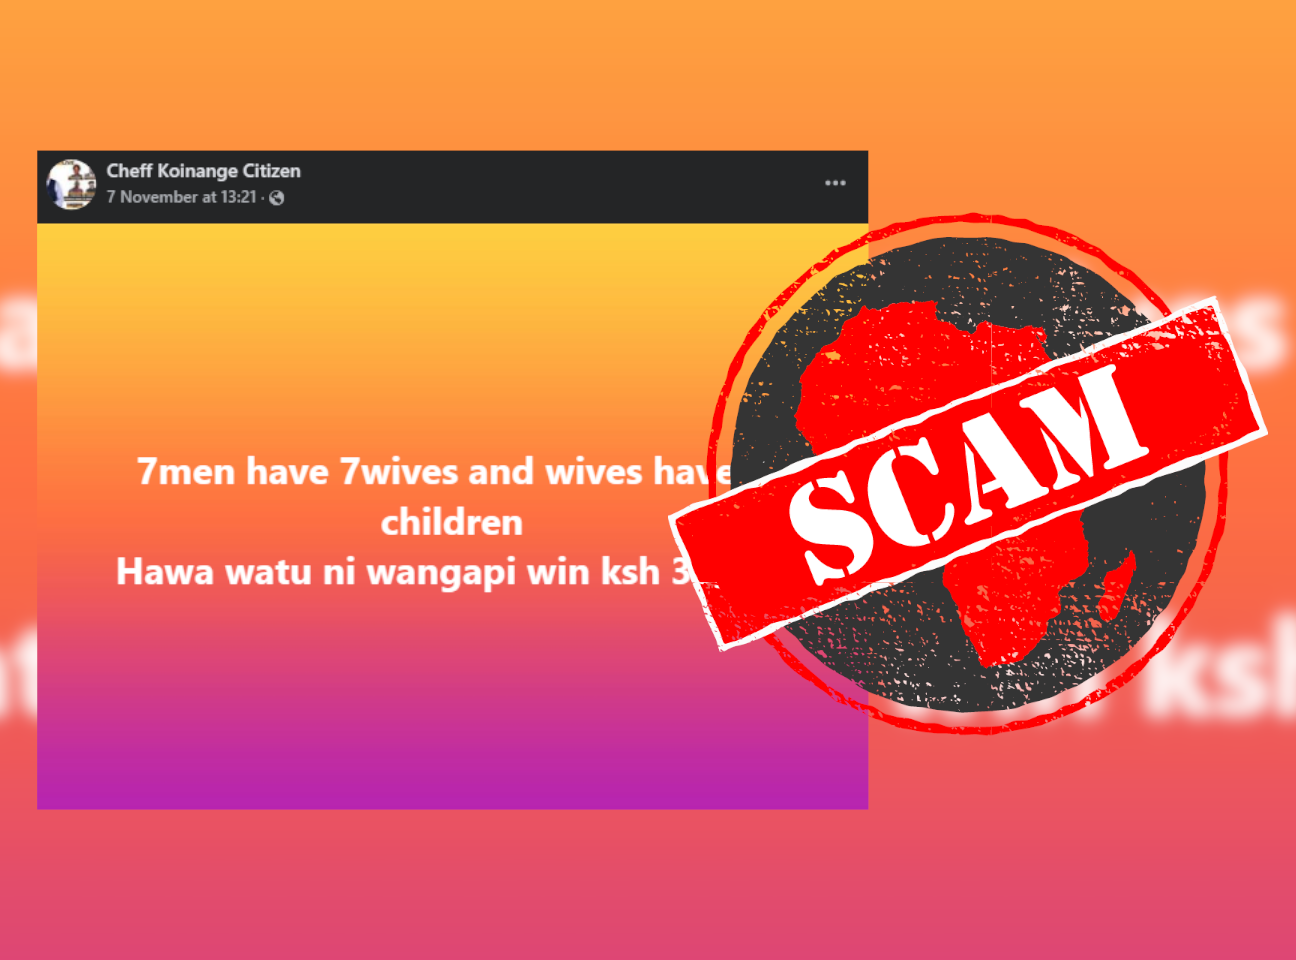 KoinangePage_Scam